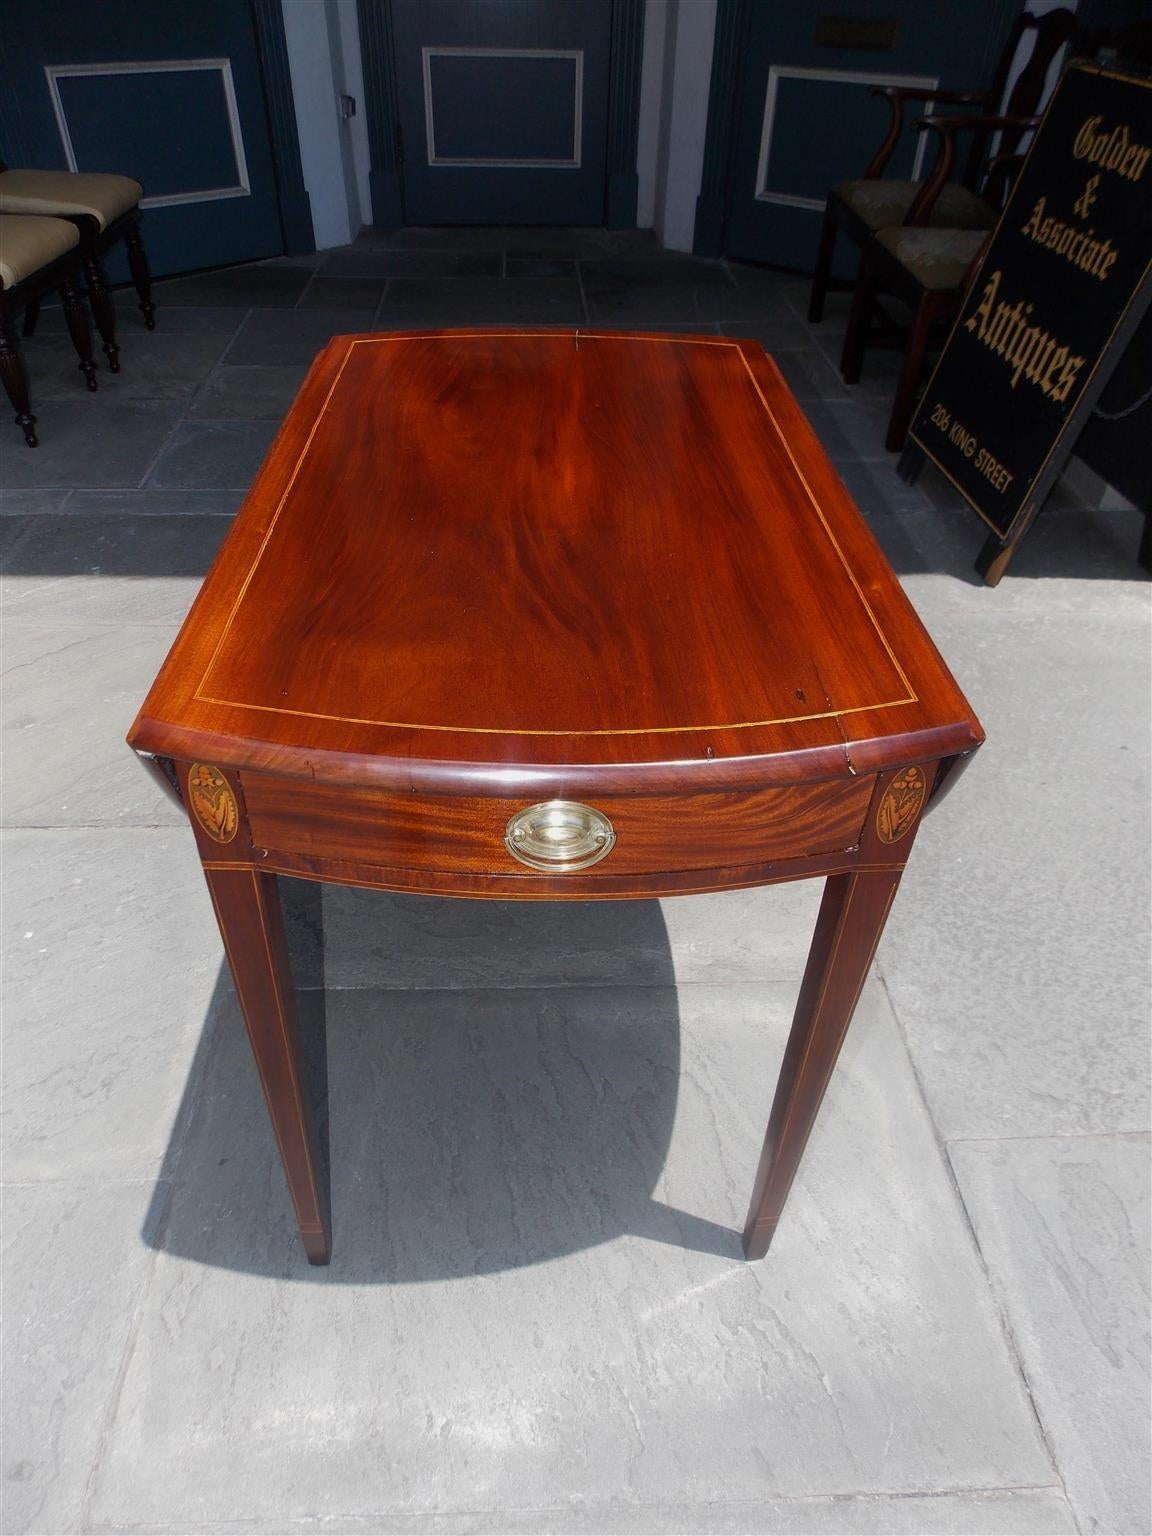 American Hepplewhite one-drawer mahogany and satinwood string inlaid drop leaf pembroke table with oak leaf and acorn pateras, original brass pull, and terminating on squared tapered cuffed legs. Table is 21